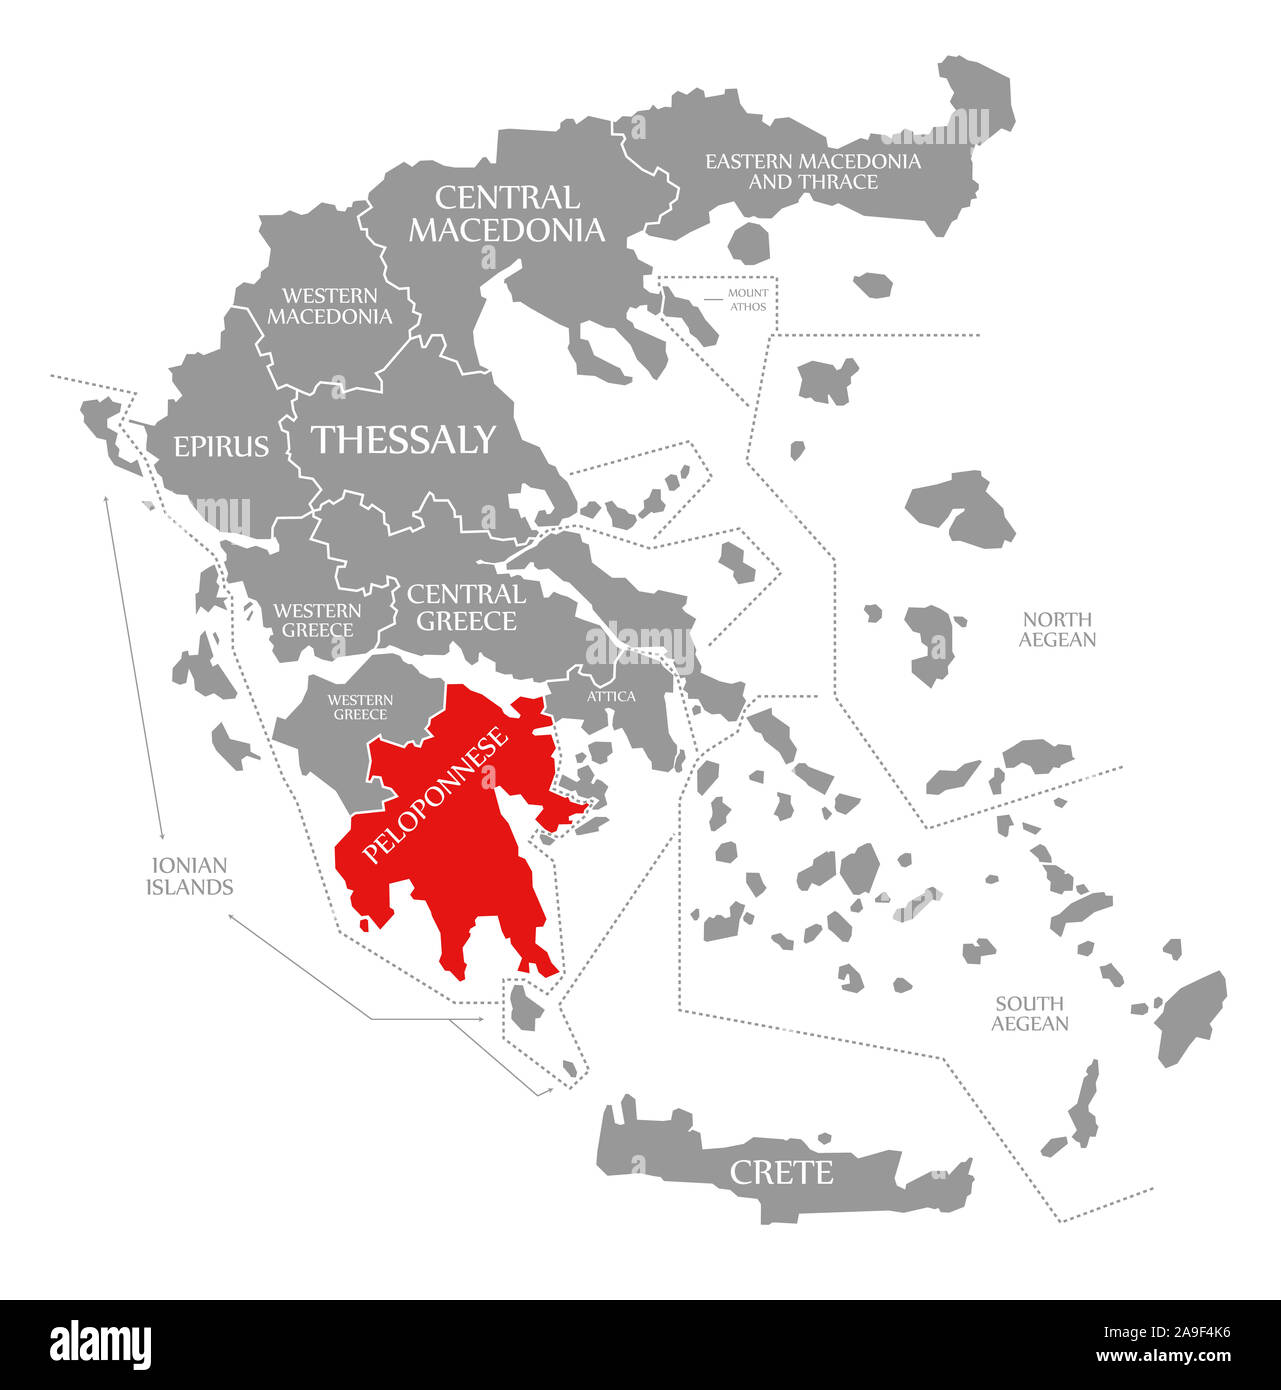 Peloponnese red highlighted in map of Greece Stock Photo - Alamy